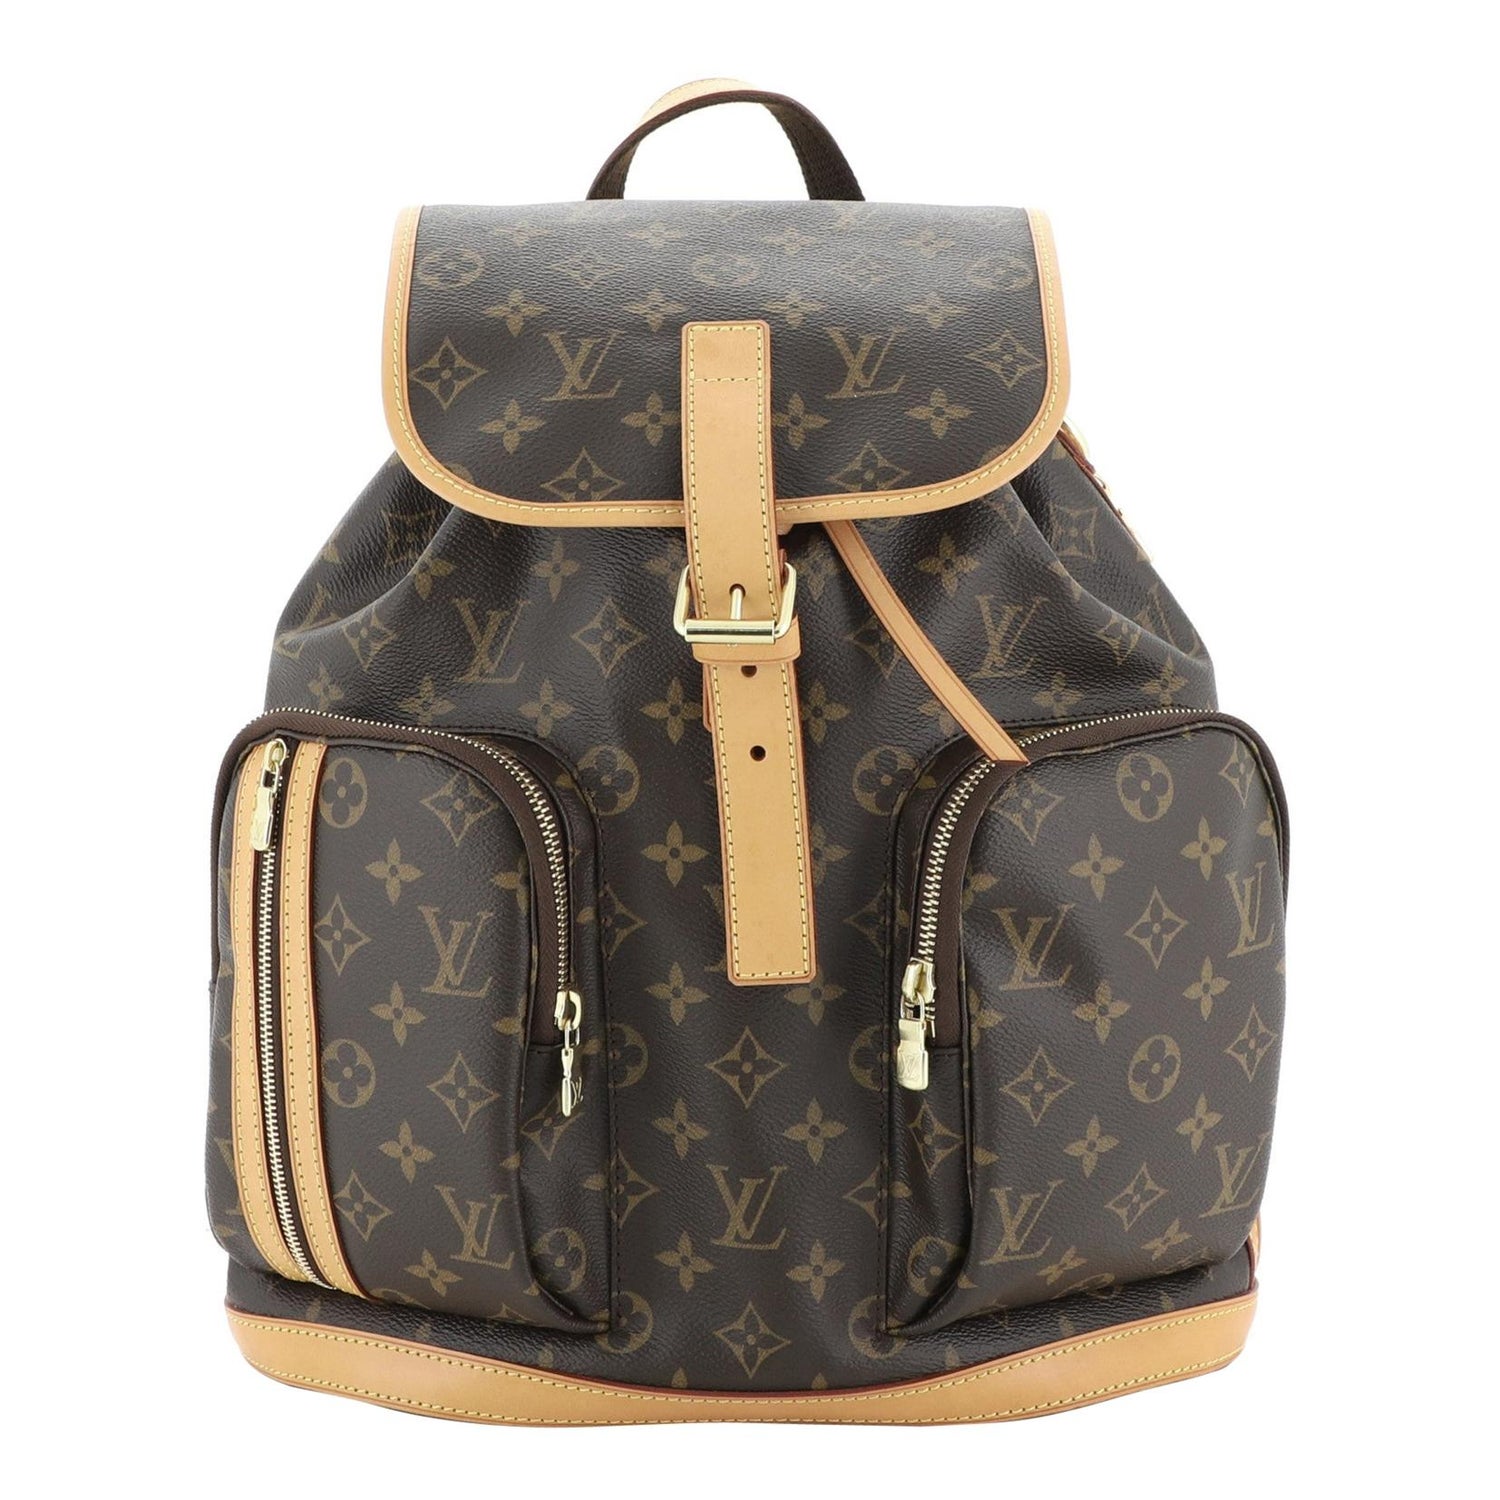 Louis Vuitton Bosphore Backpack - For Sale on 1stDibs  lv bosphore backpack,  bosphore backpack louis vuitton, louis vuitton backpack bosphore